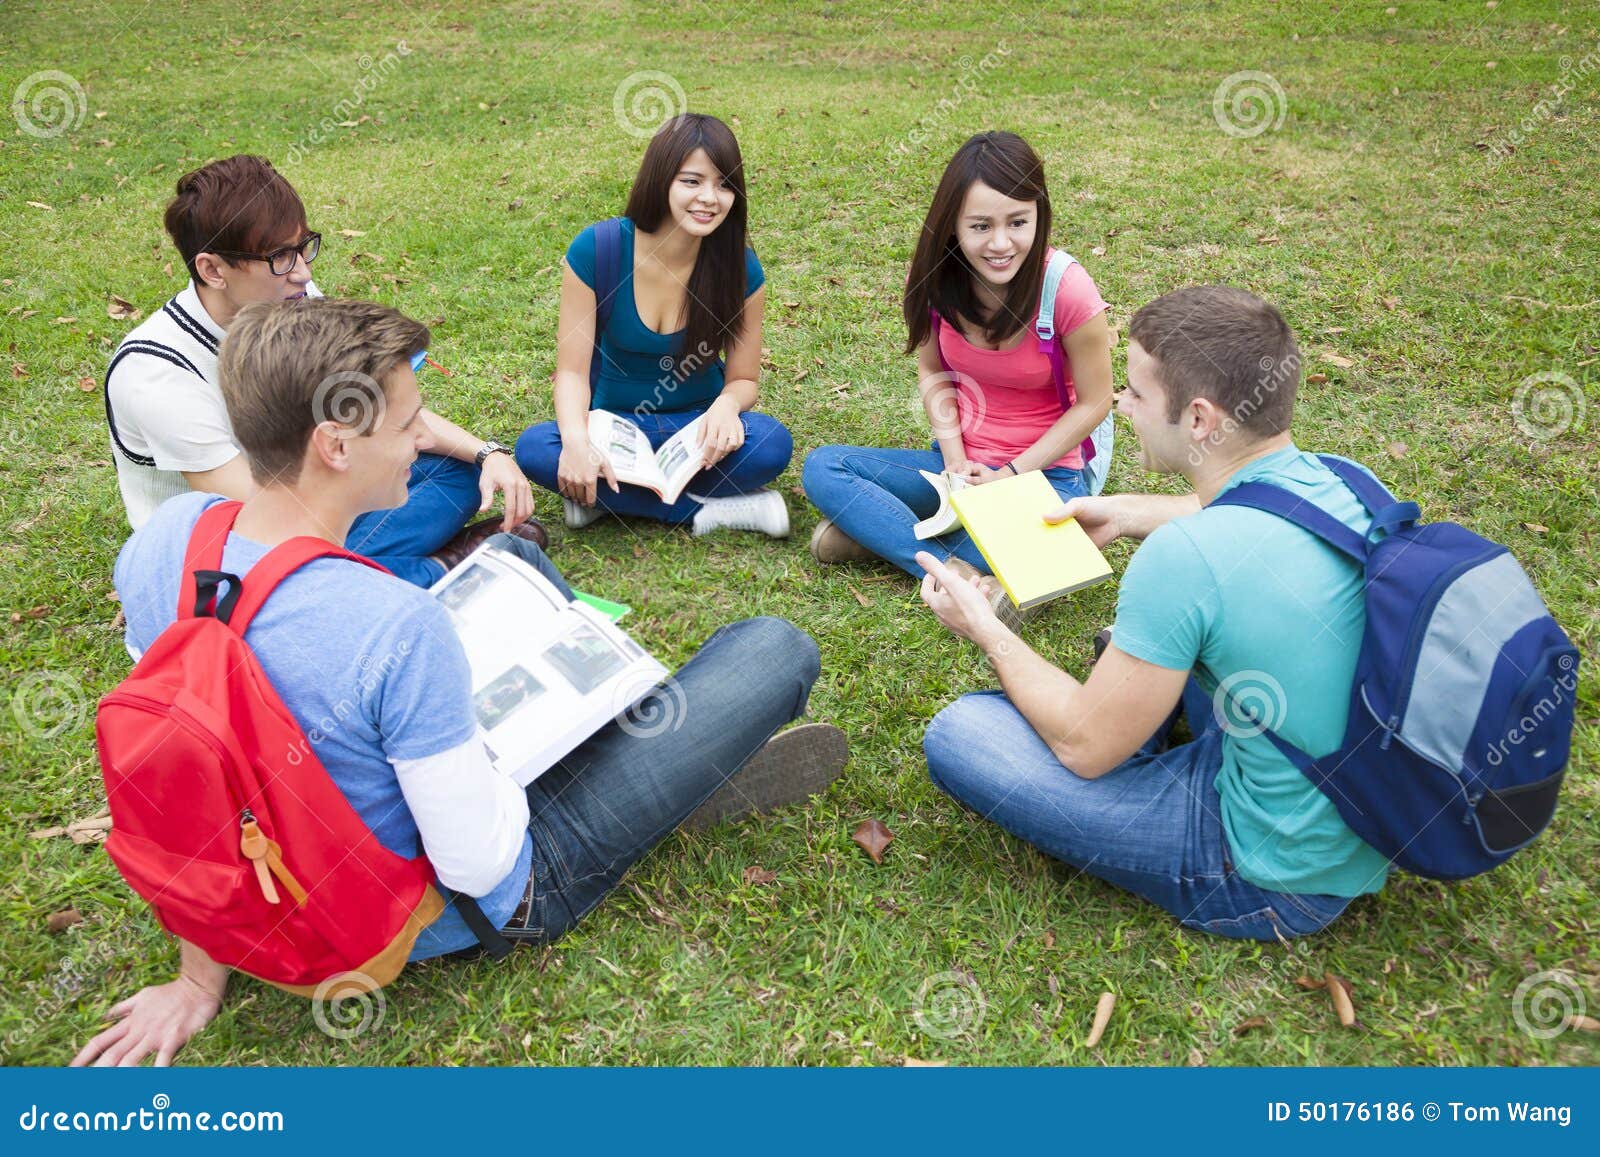 college students studying and discuss together in campus